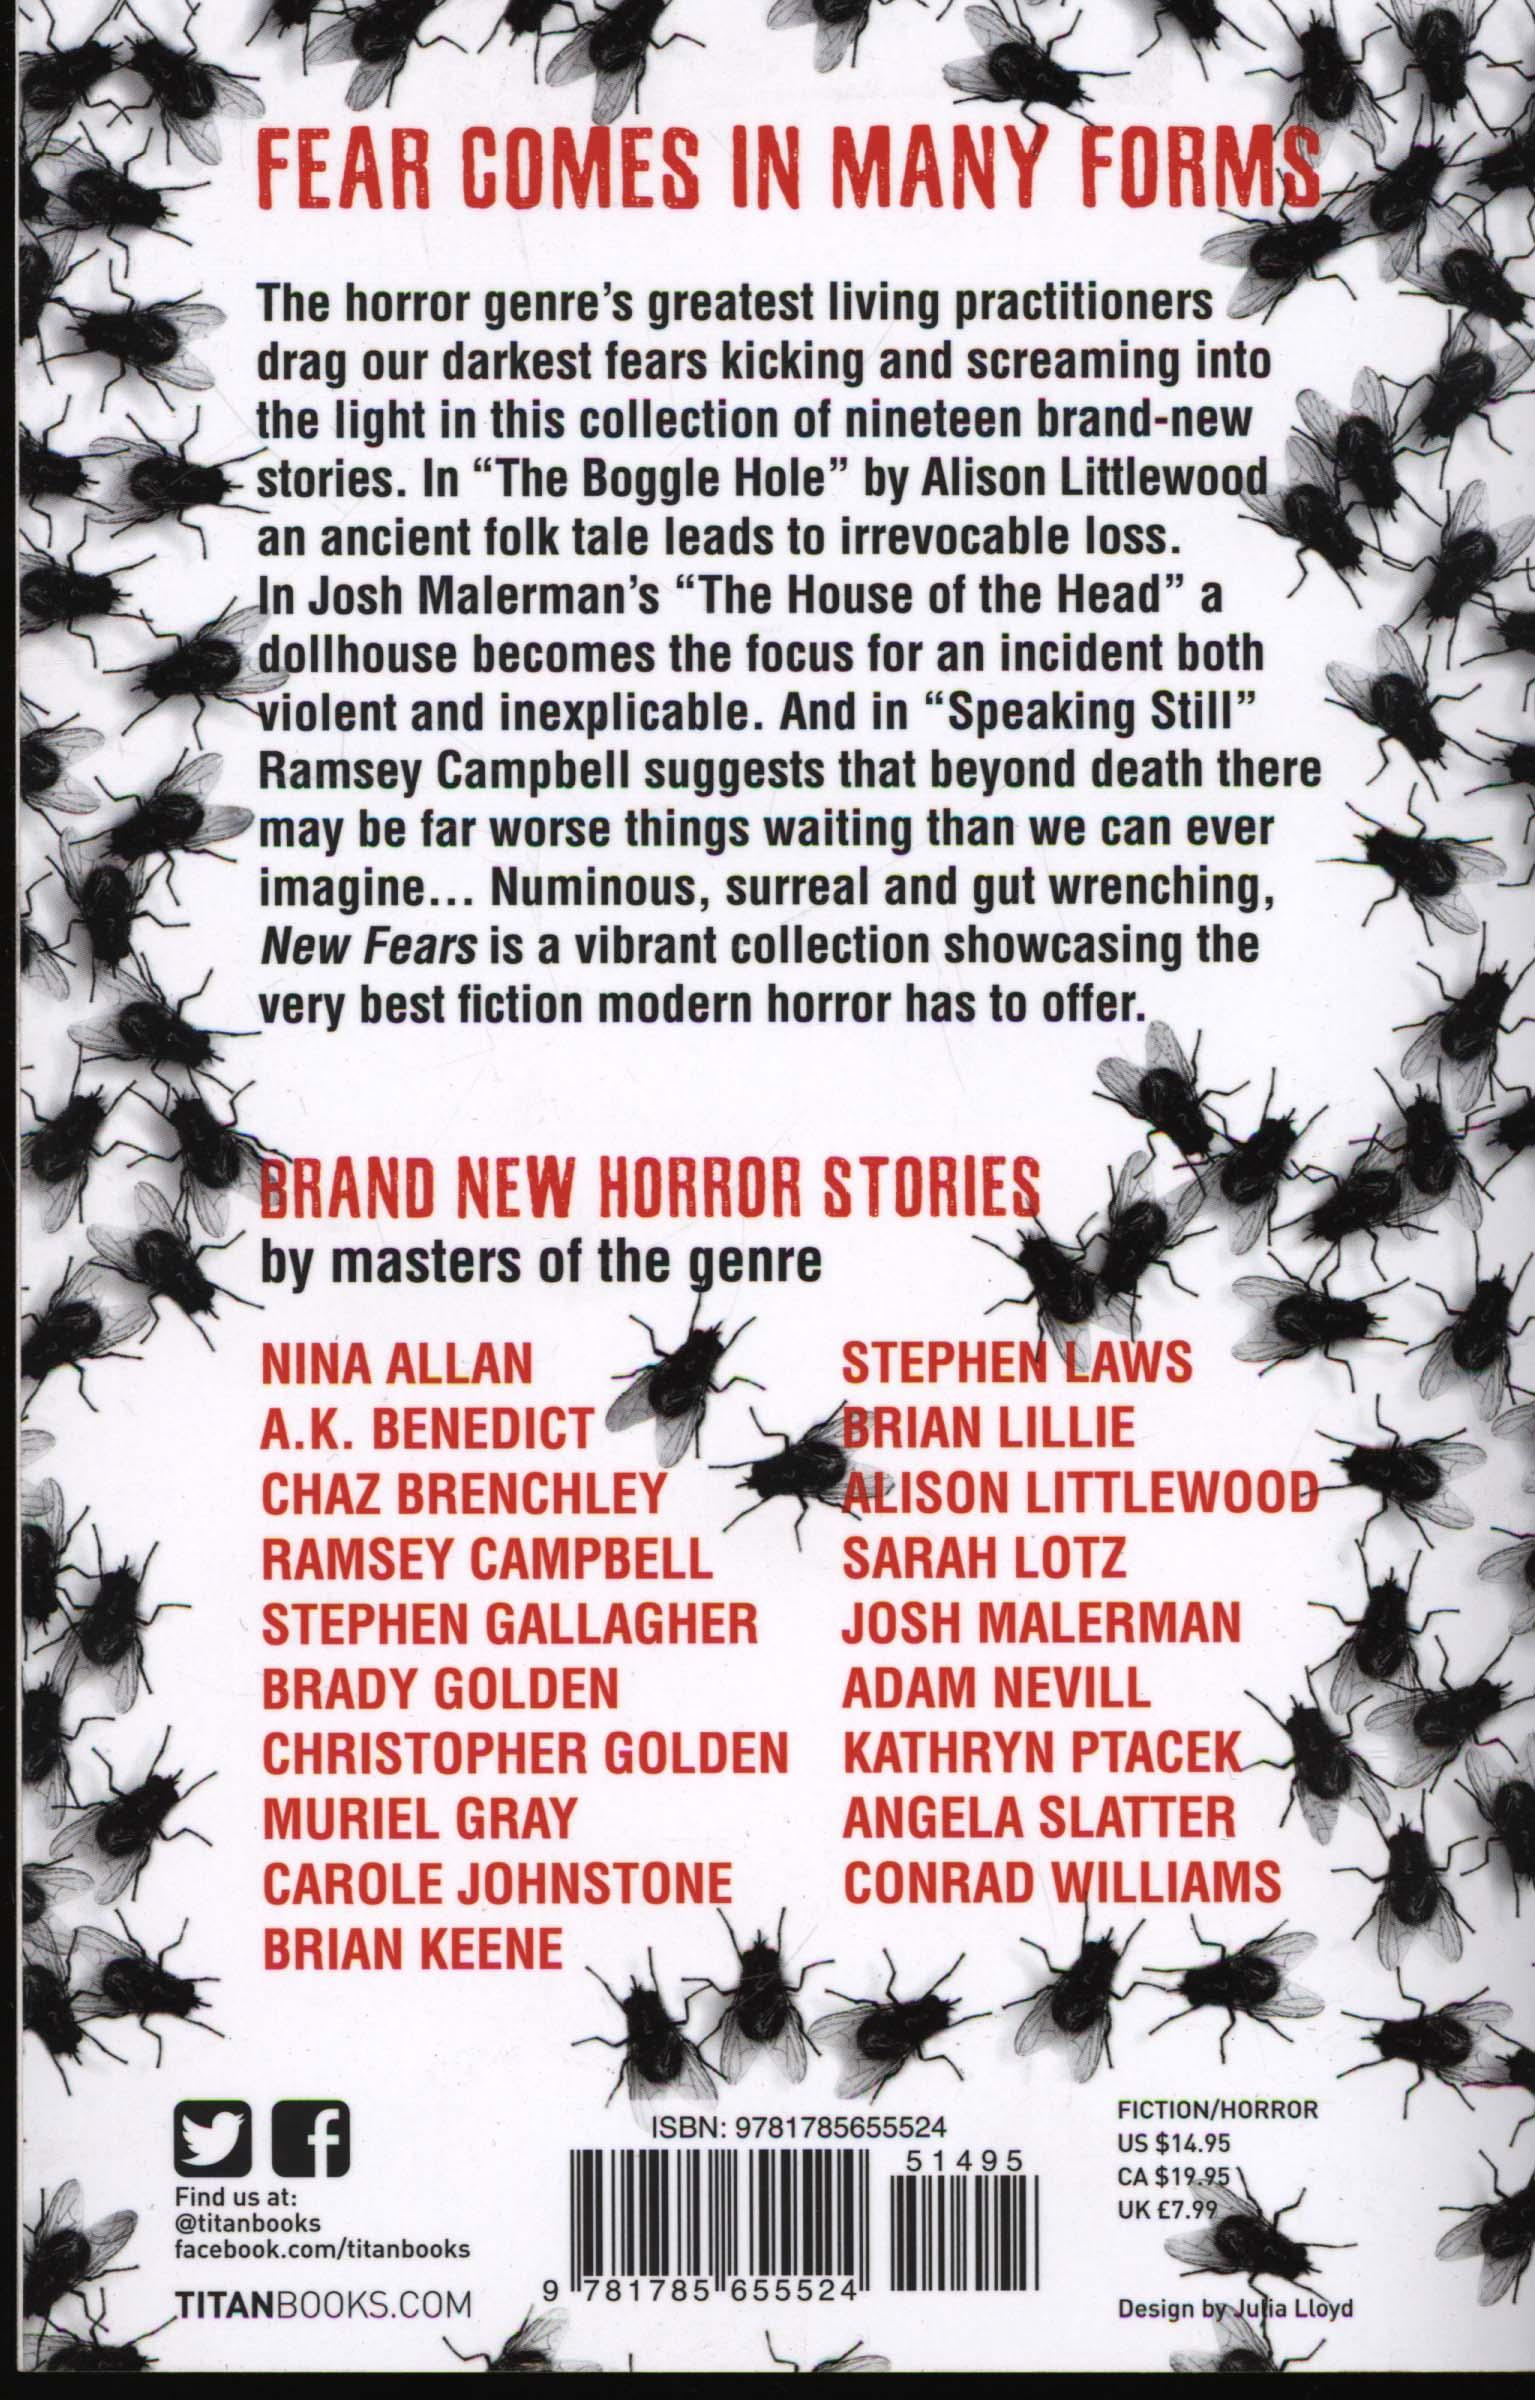 New Fears - New Horror Stories by Masters of the Genre